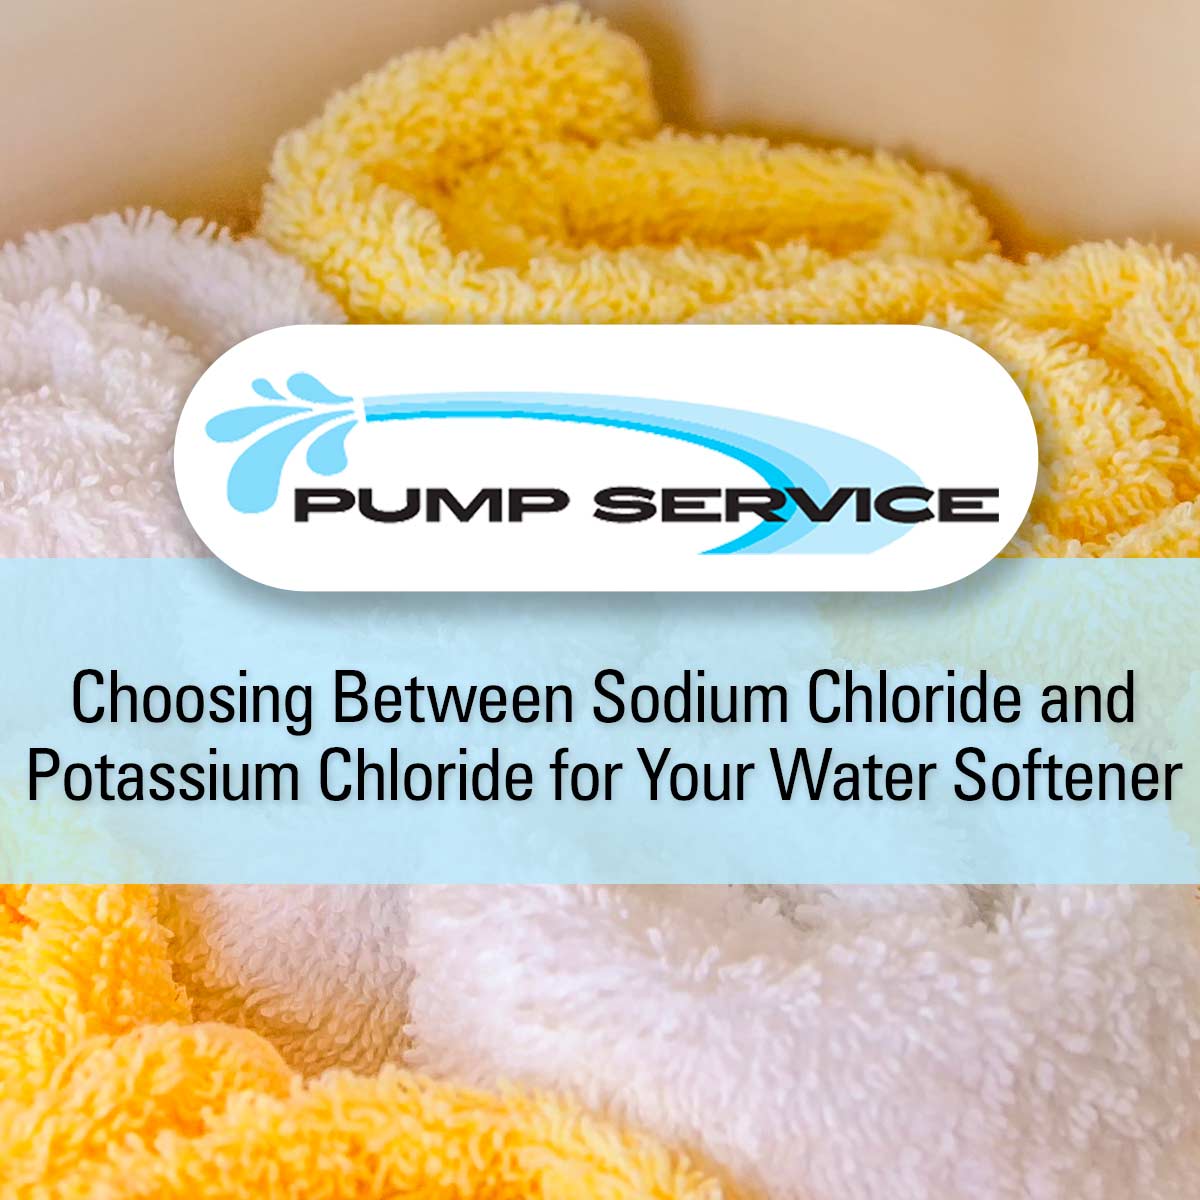 Choosing Between Sodium Chloride and Potassium Chloride for Your Water Softener